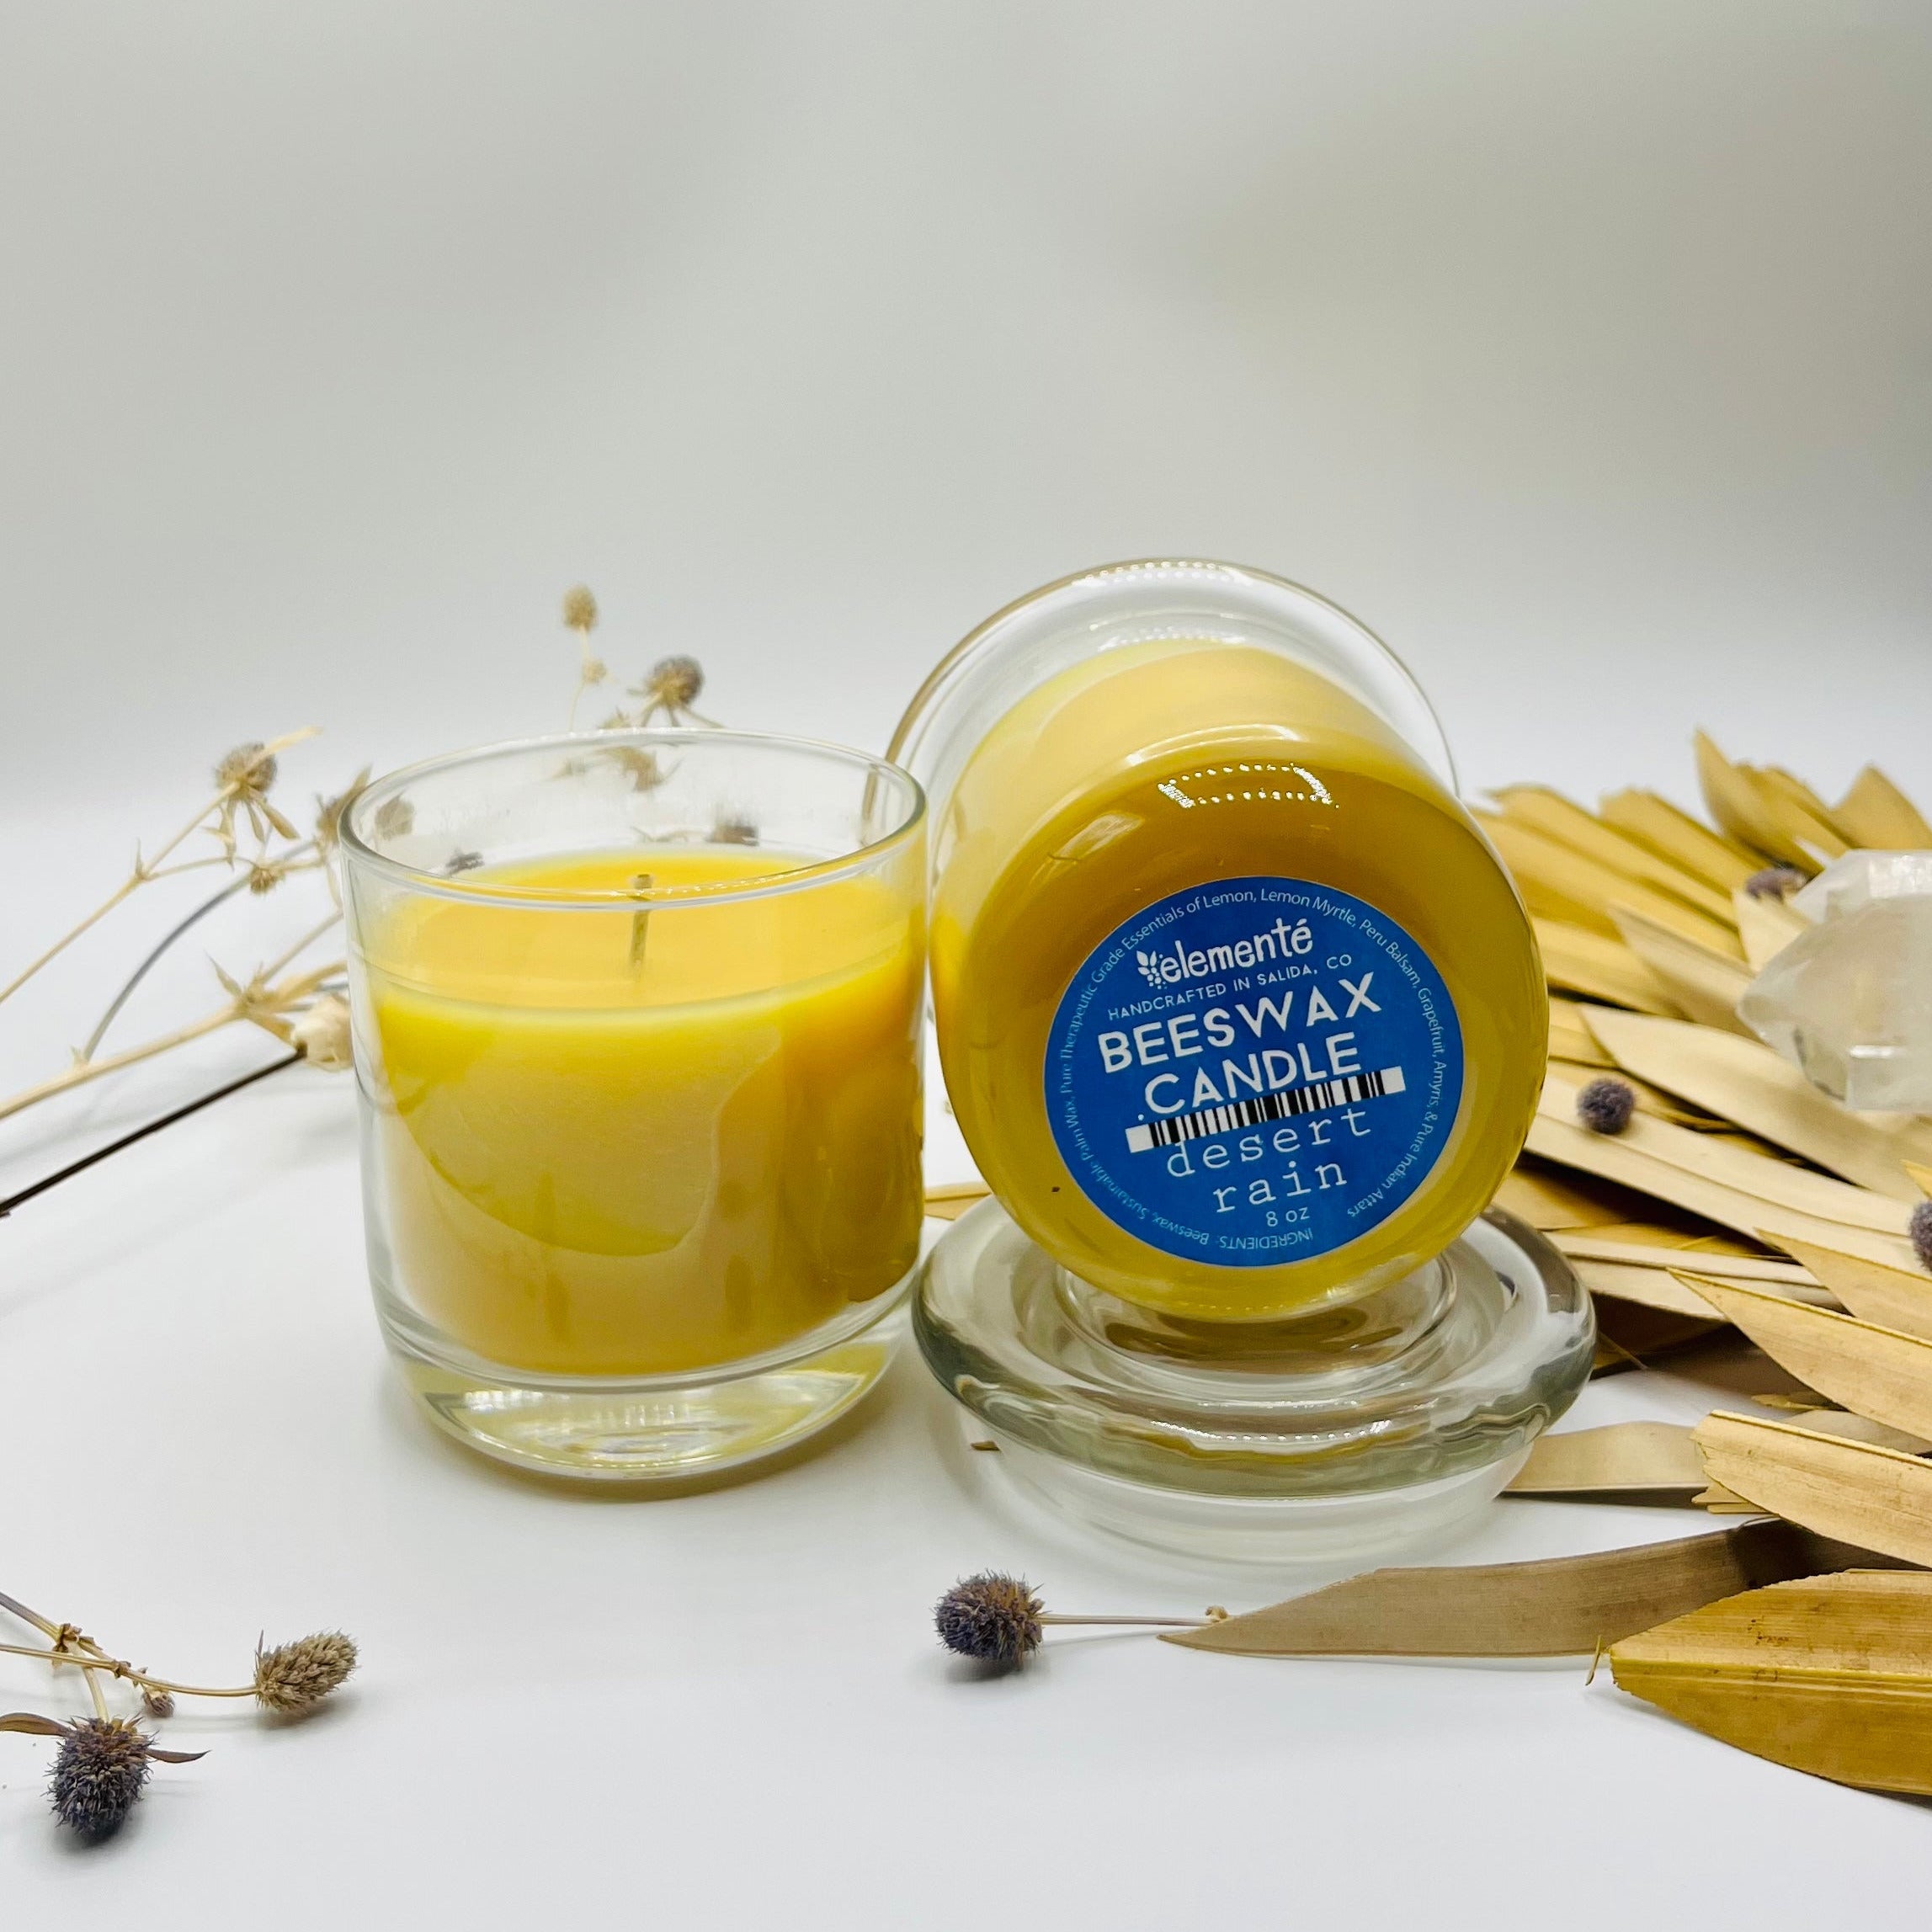 Desert Rain Beeswax Candle  Vital Living Herbs And Nutrition